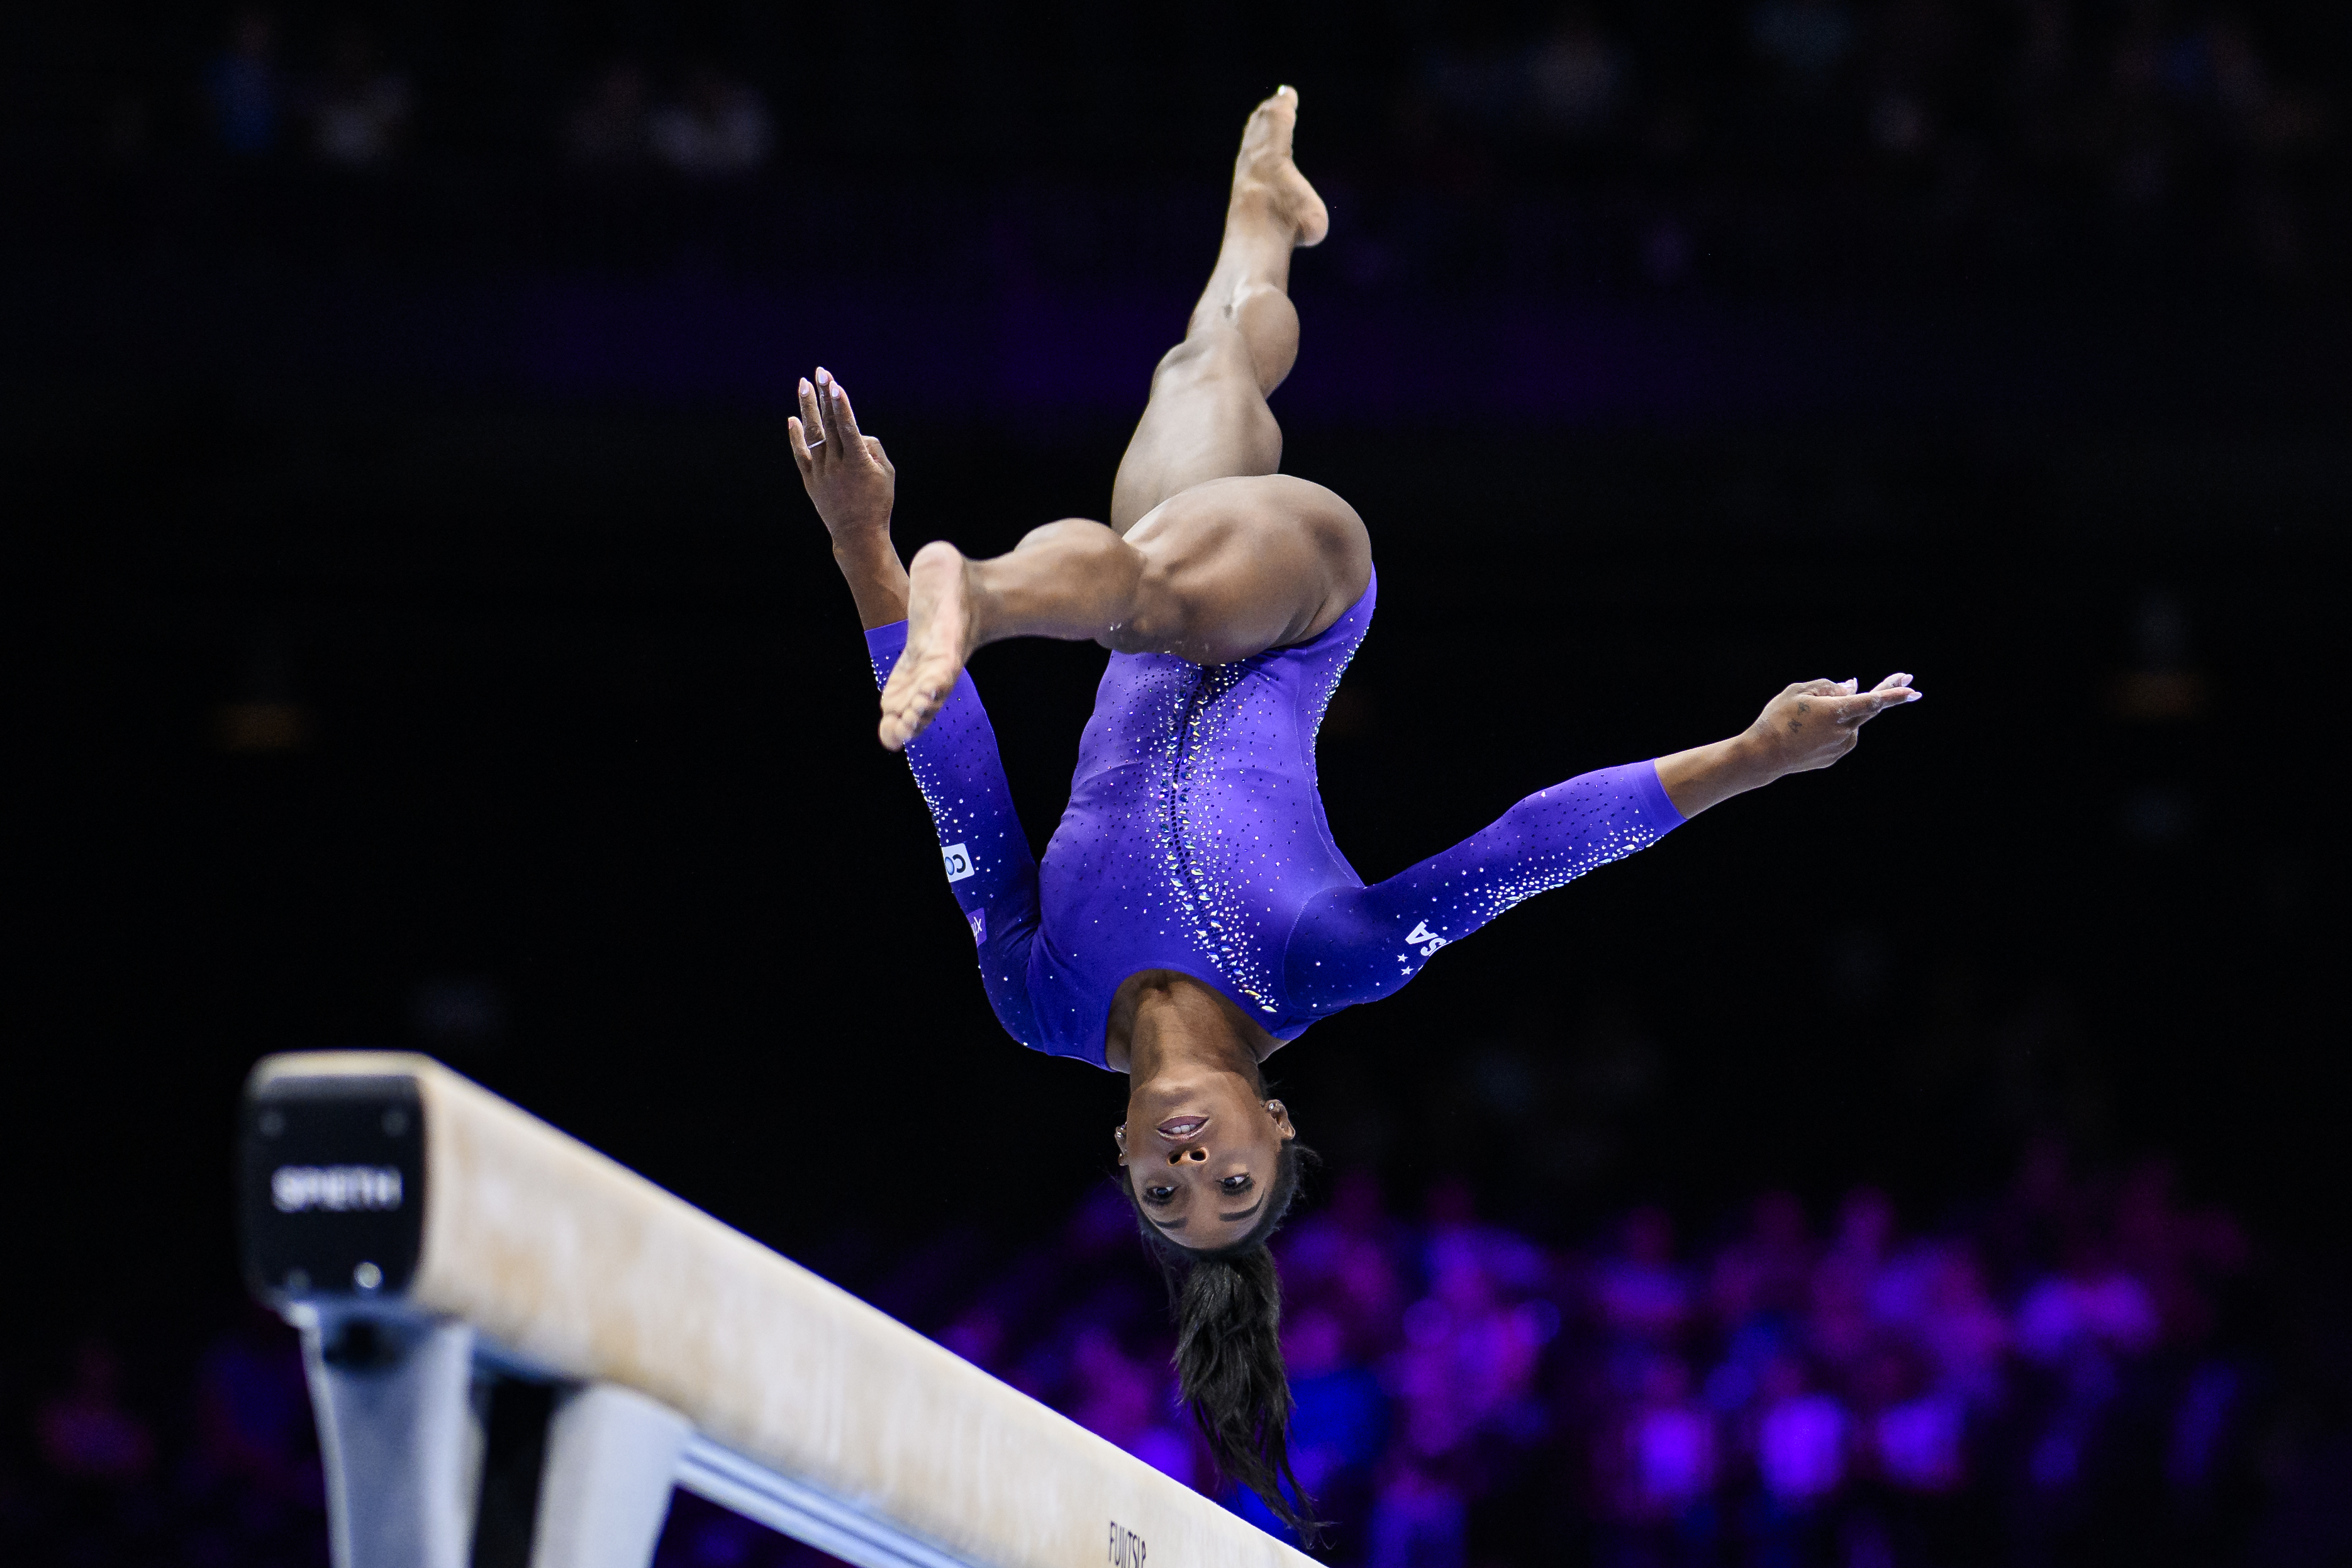 Simone Biles on the balance beam at the 2023 World Championships on October 8, 2023, Belgium, Antwerpen. | Source: Getty Images